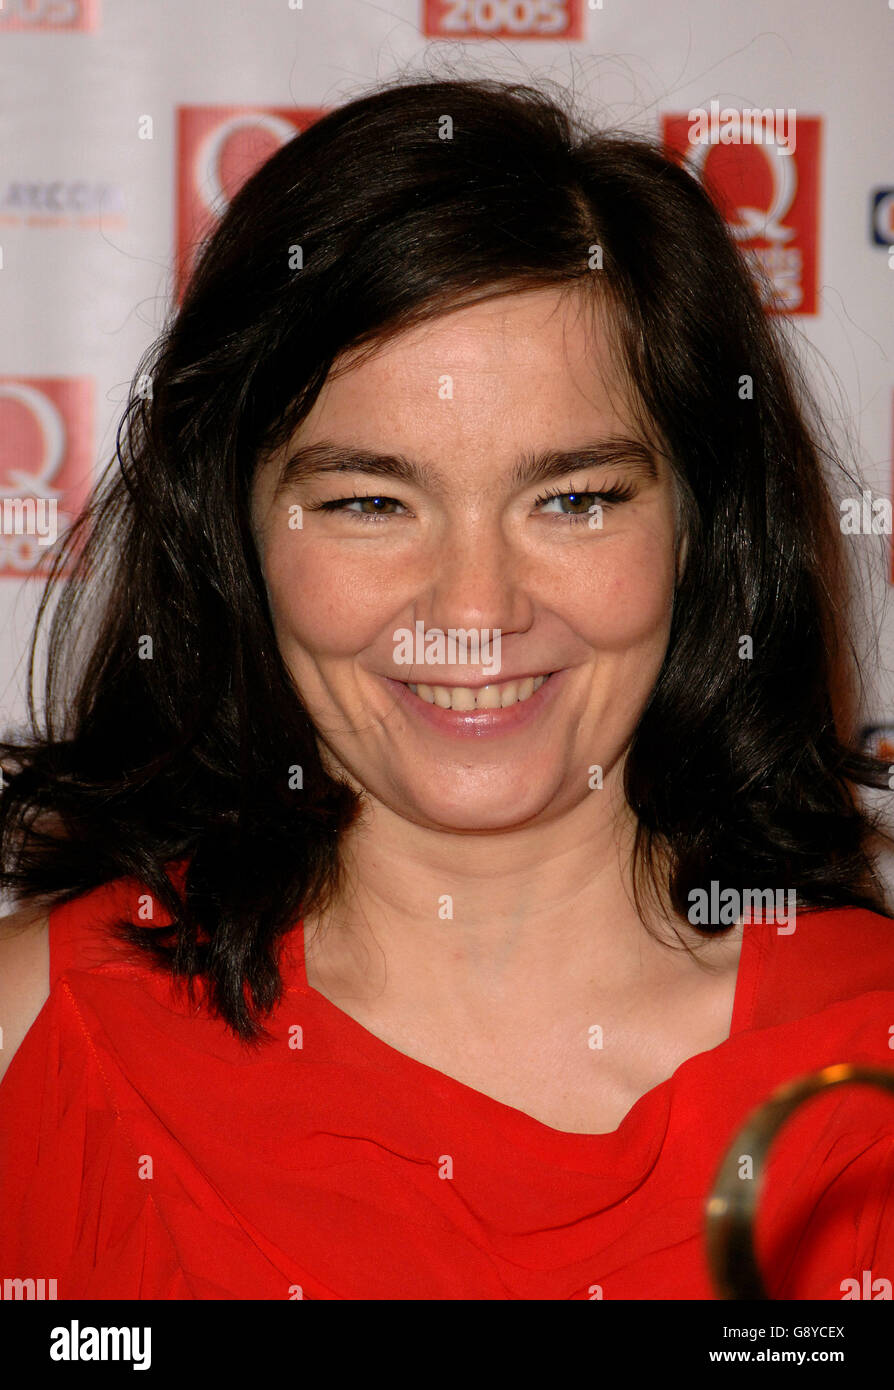 Singer Bjork during the annual Q Awards 2005, the music magazine's annual awards ceremony, at the Grosvenor House Hotel, central London, Monday 10 October 2005. See PA story SHOWBIZ Q. PRESS ASSOCIATION Photo. Photo credit should read: Ian West/PA Stock Photo